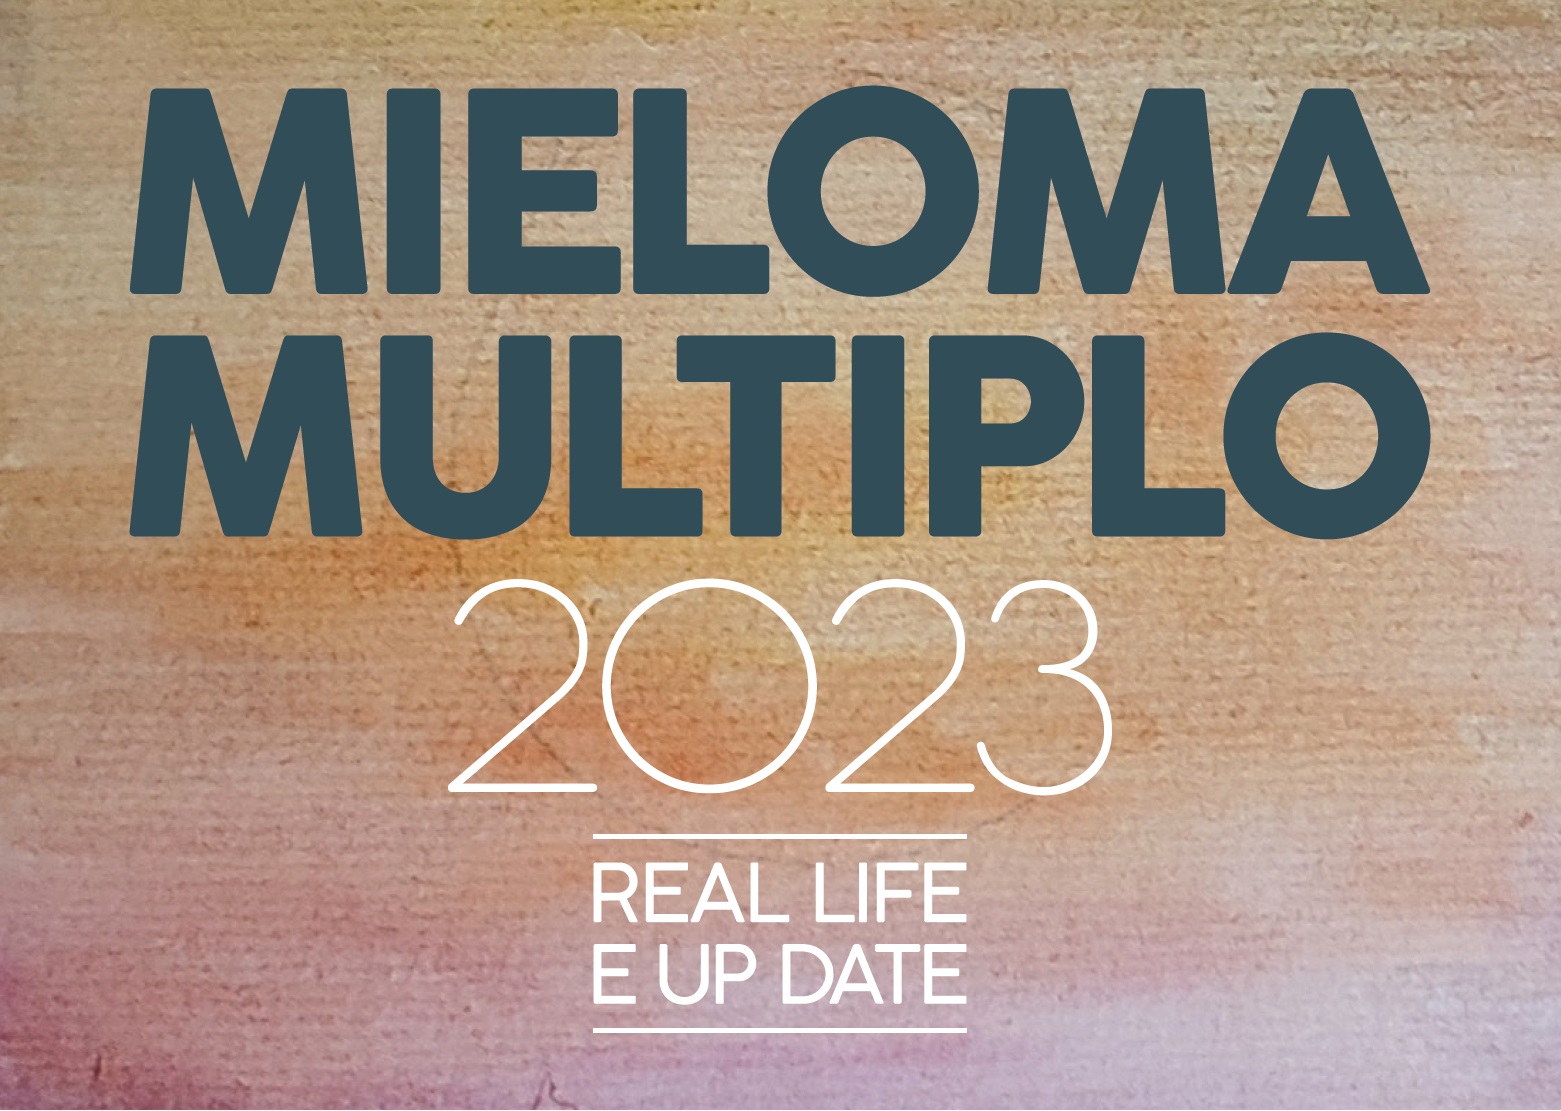 MIELOMA MULTIPLO 2023. REAL LIFE E UP DATE